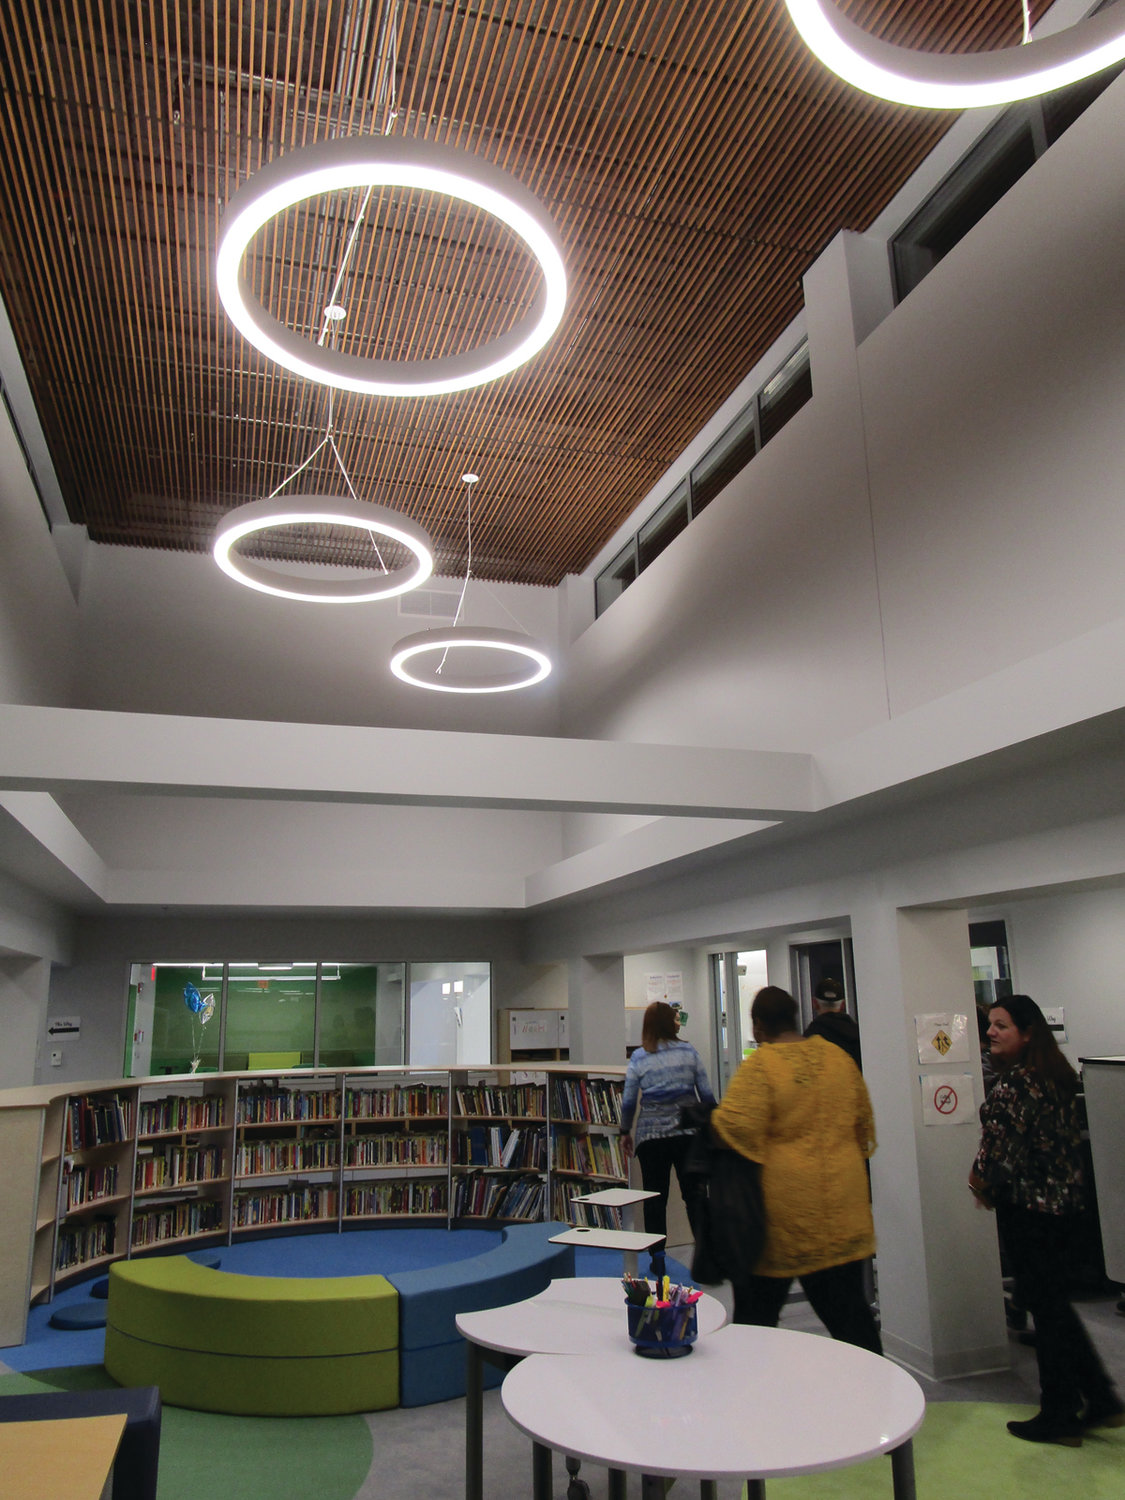 OPEN SPACES: The renovated Learning Community wing  at Eden Park Elementary School features open, bright spaces.